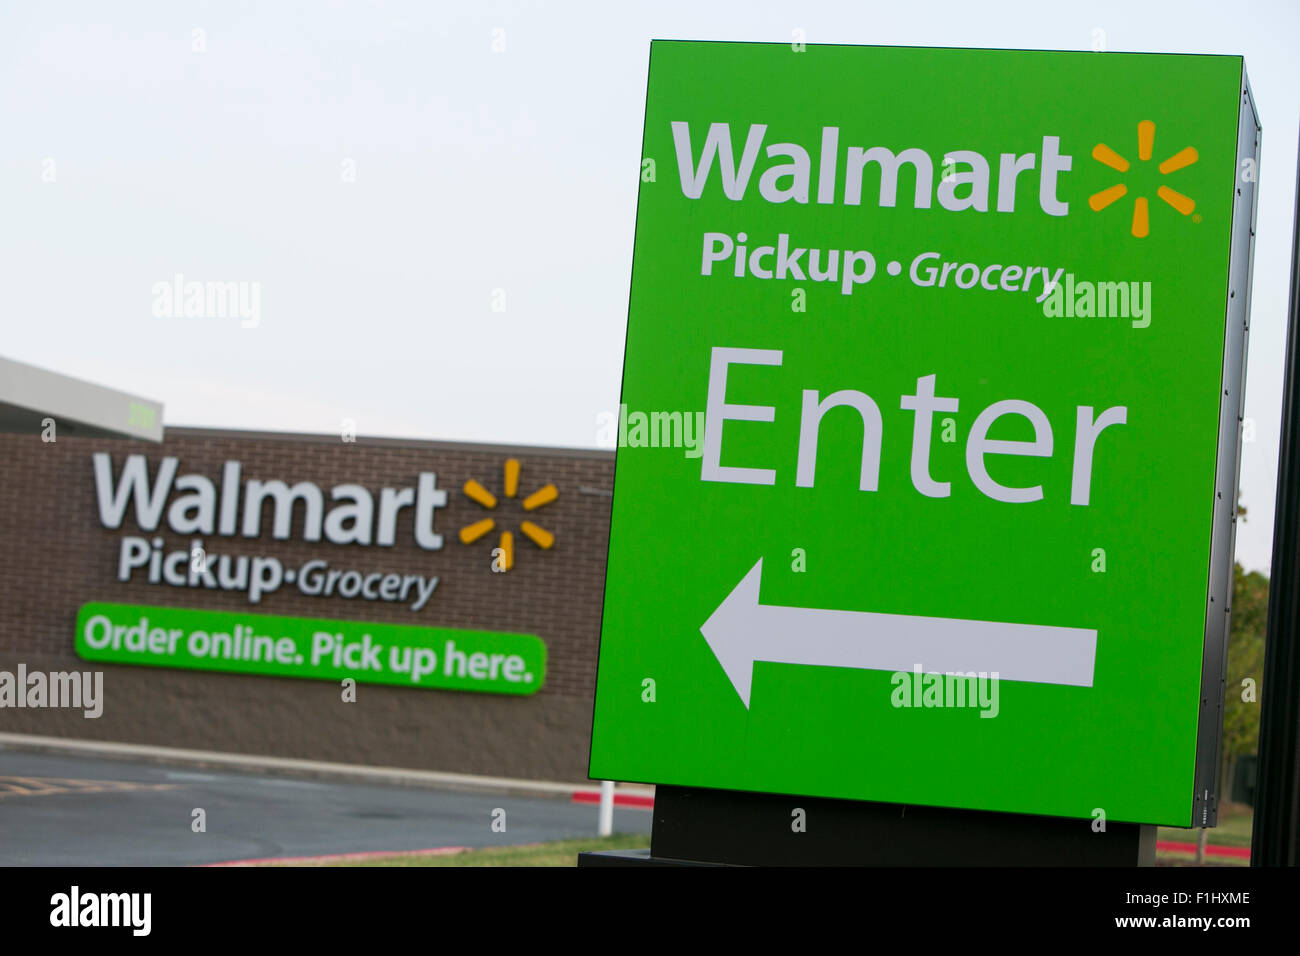 A logo sign outside of a Walmart Pickup- Grocery location in Bentonville, Arkansas on August 17, 2015. Stock Photo